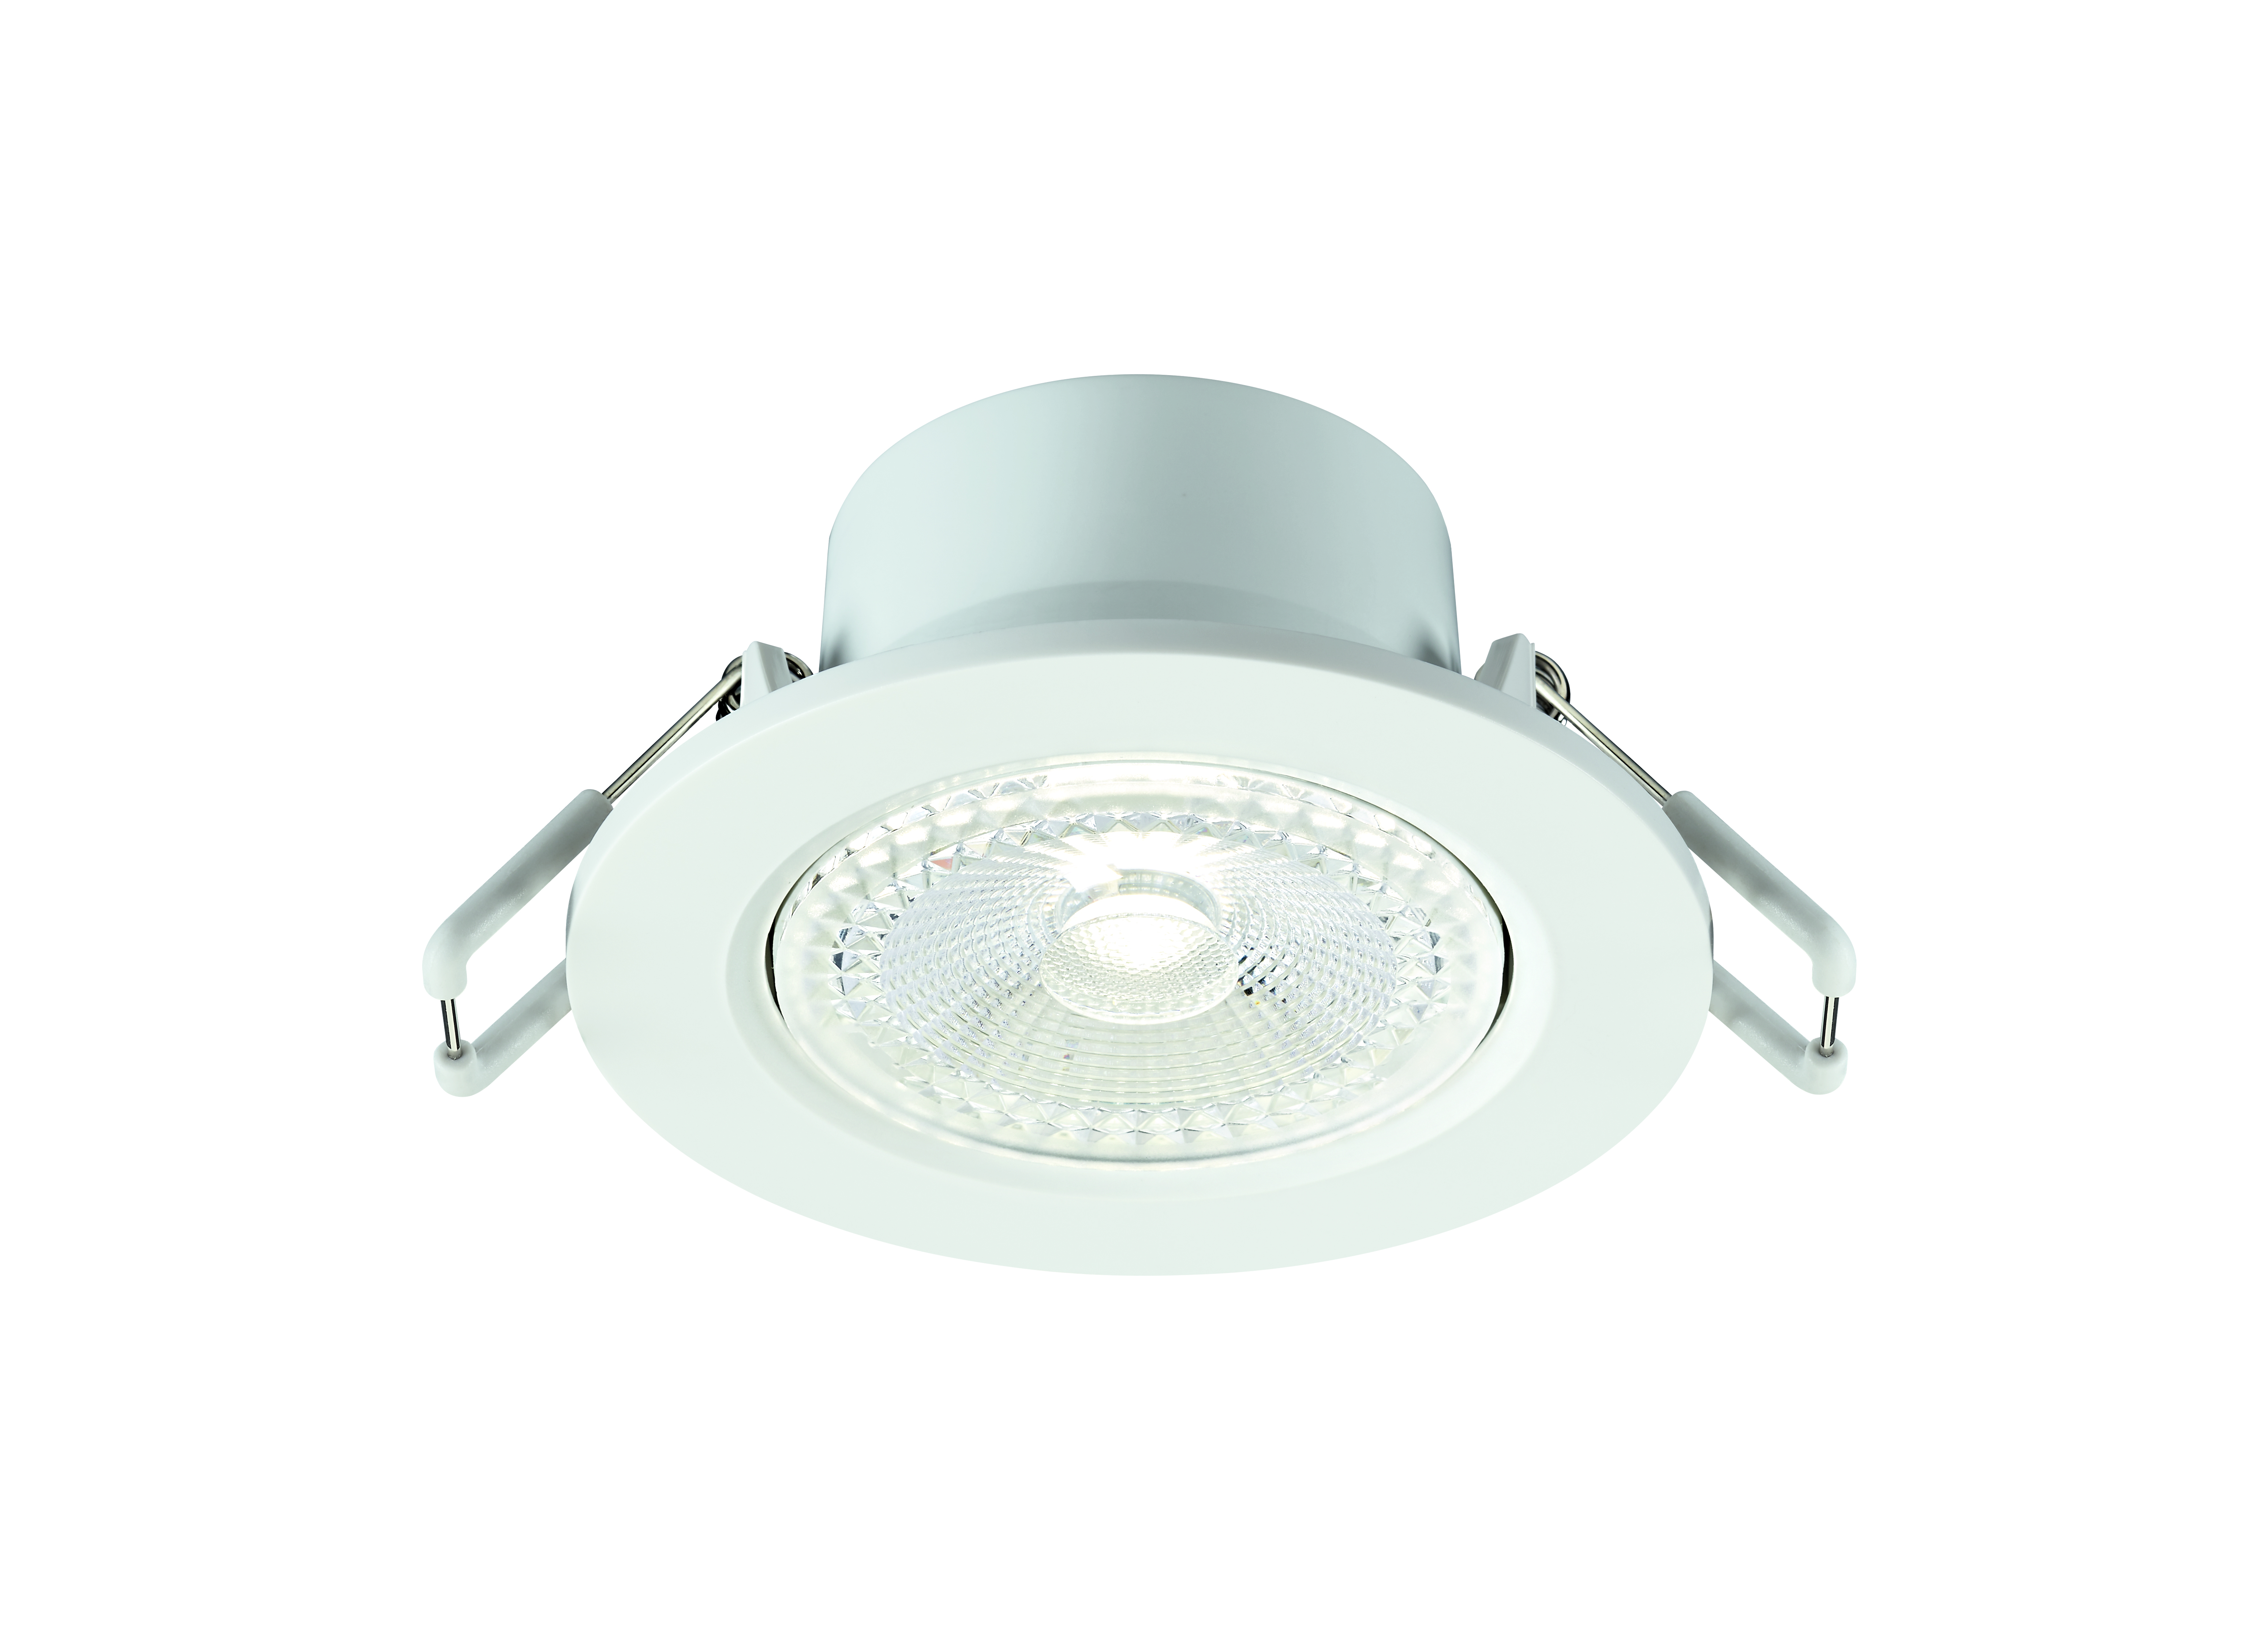 Obico Fire Rated Sylvania | Lighting Solutions